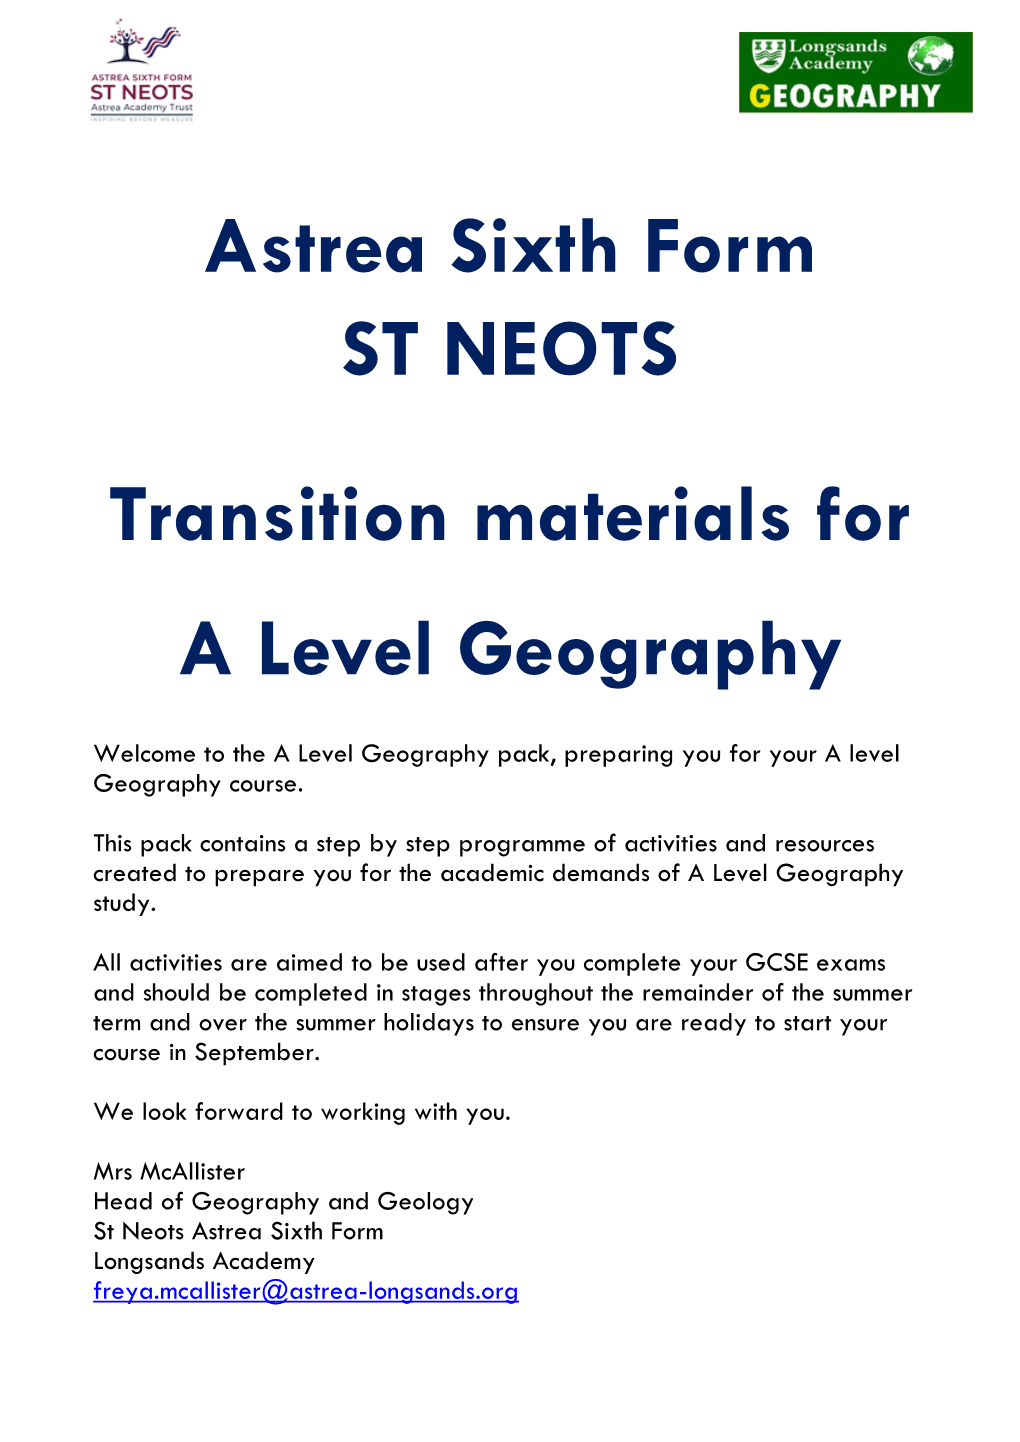 Astrea Sixth Form ST NEOTS Transition Materials for a Level